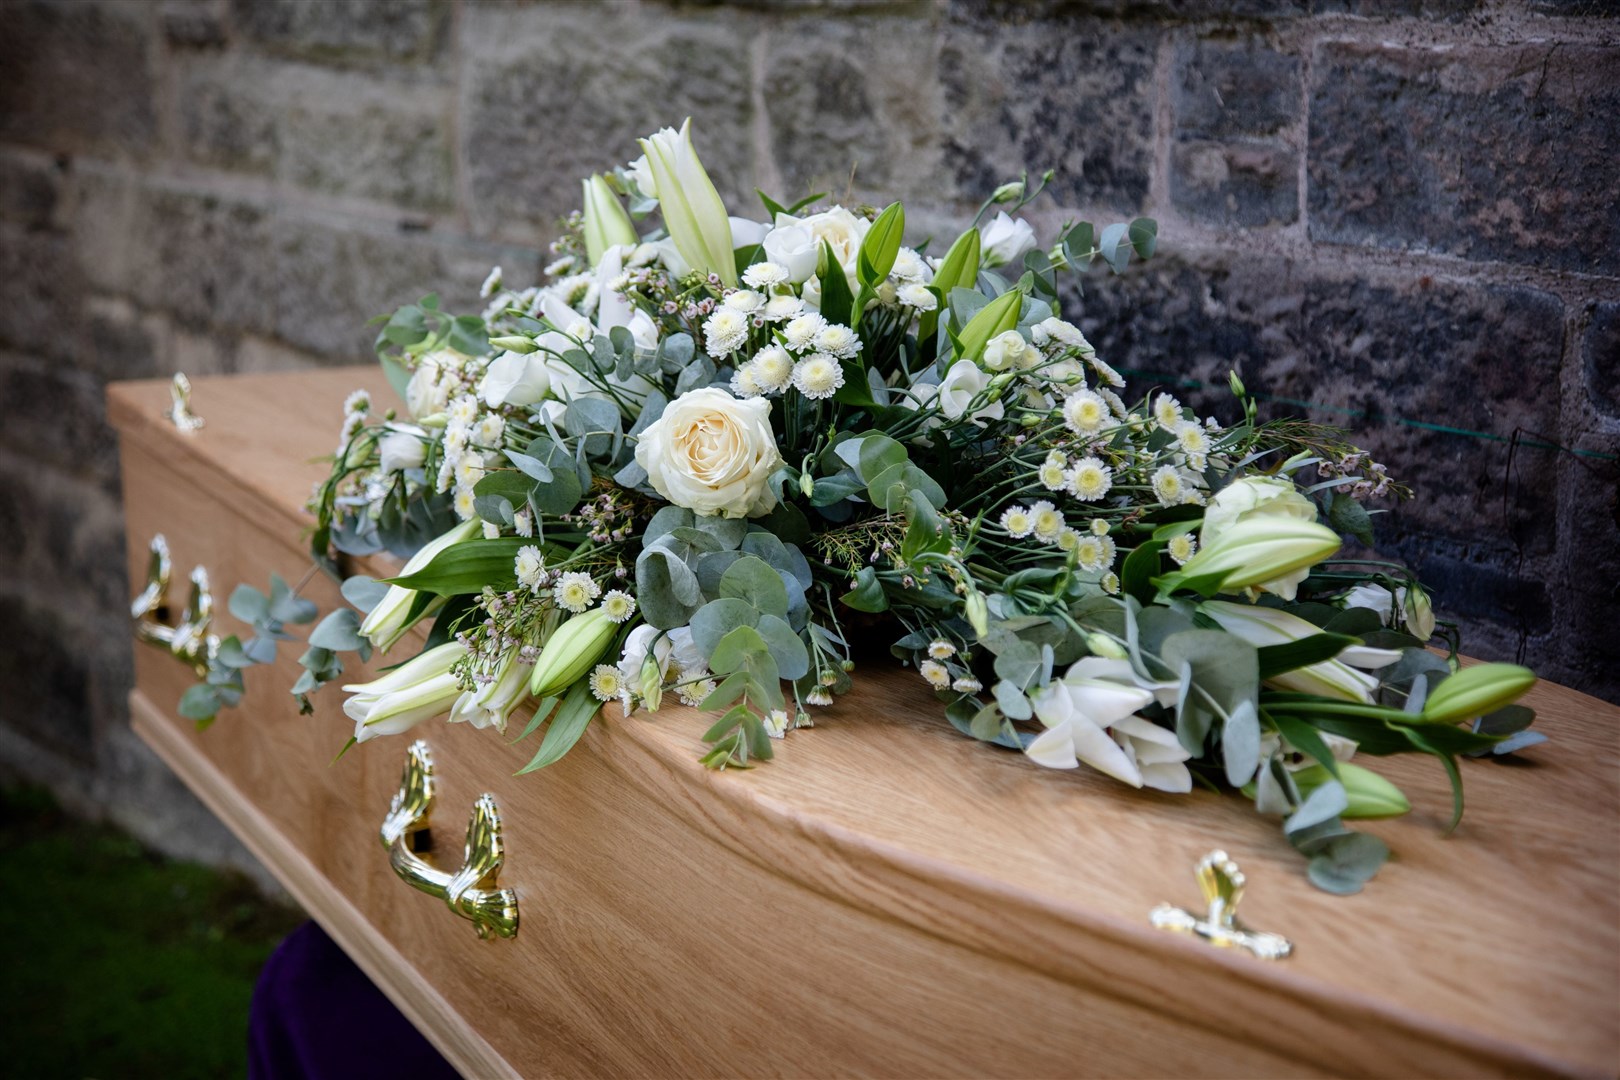 Funeral directors have put measures in place to help deal with coronavirus.